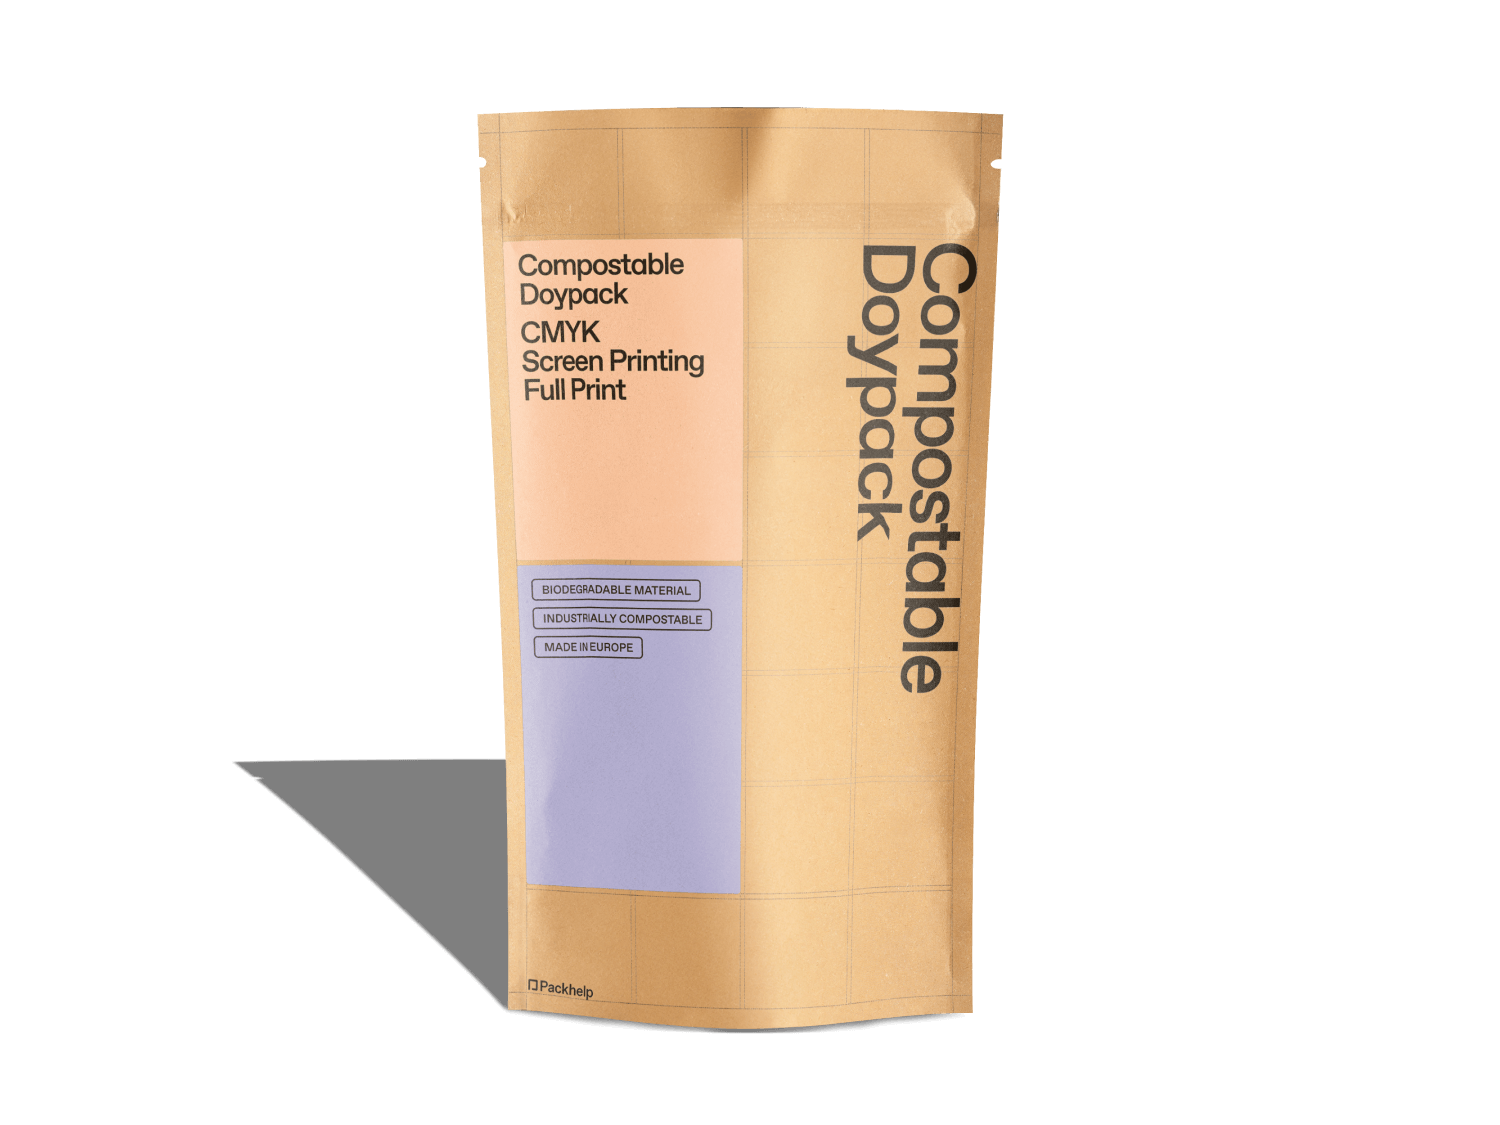 Compostable Doypack